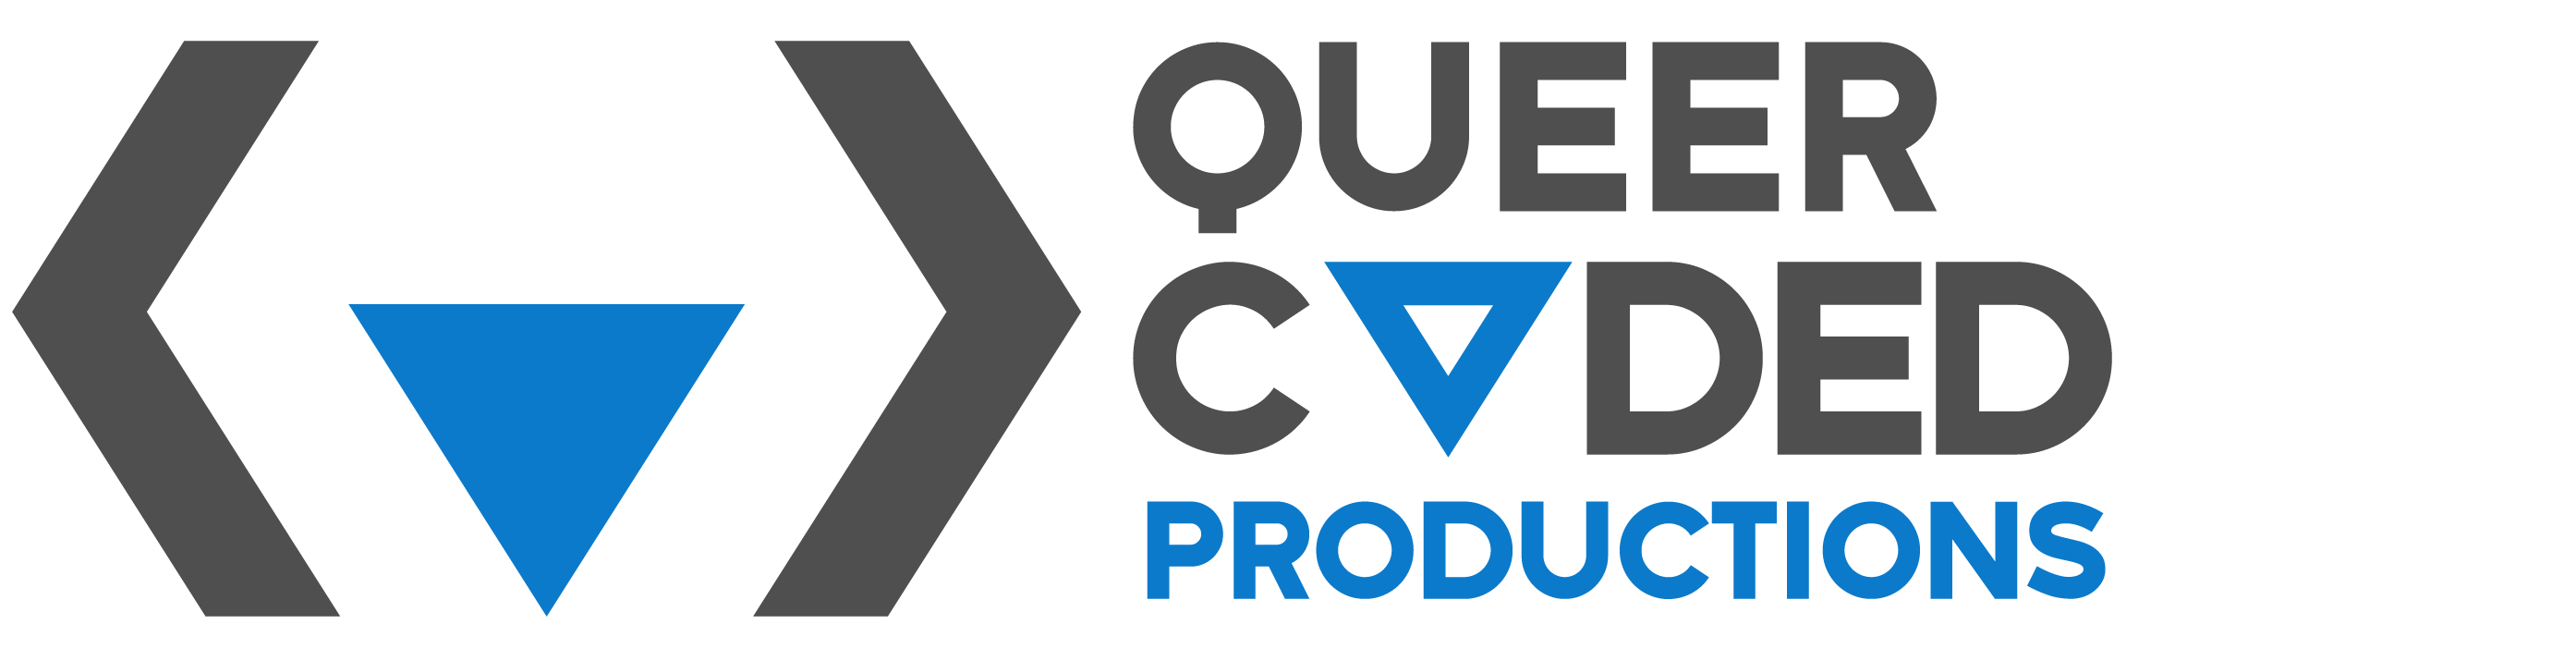 QueerCoded Production logo